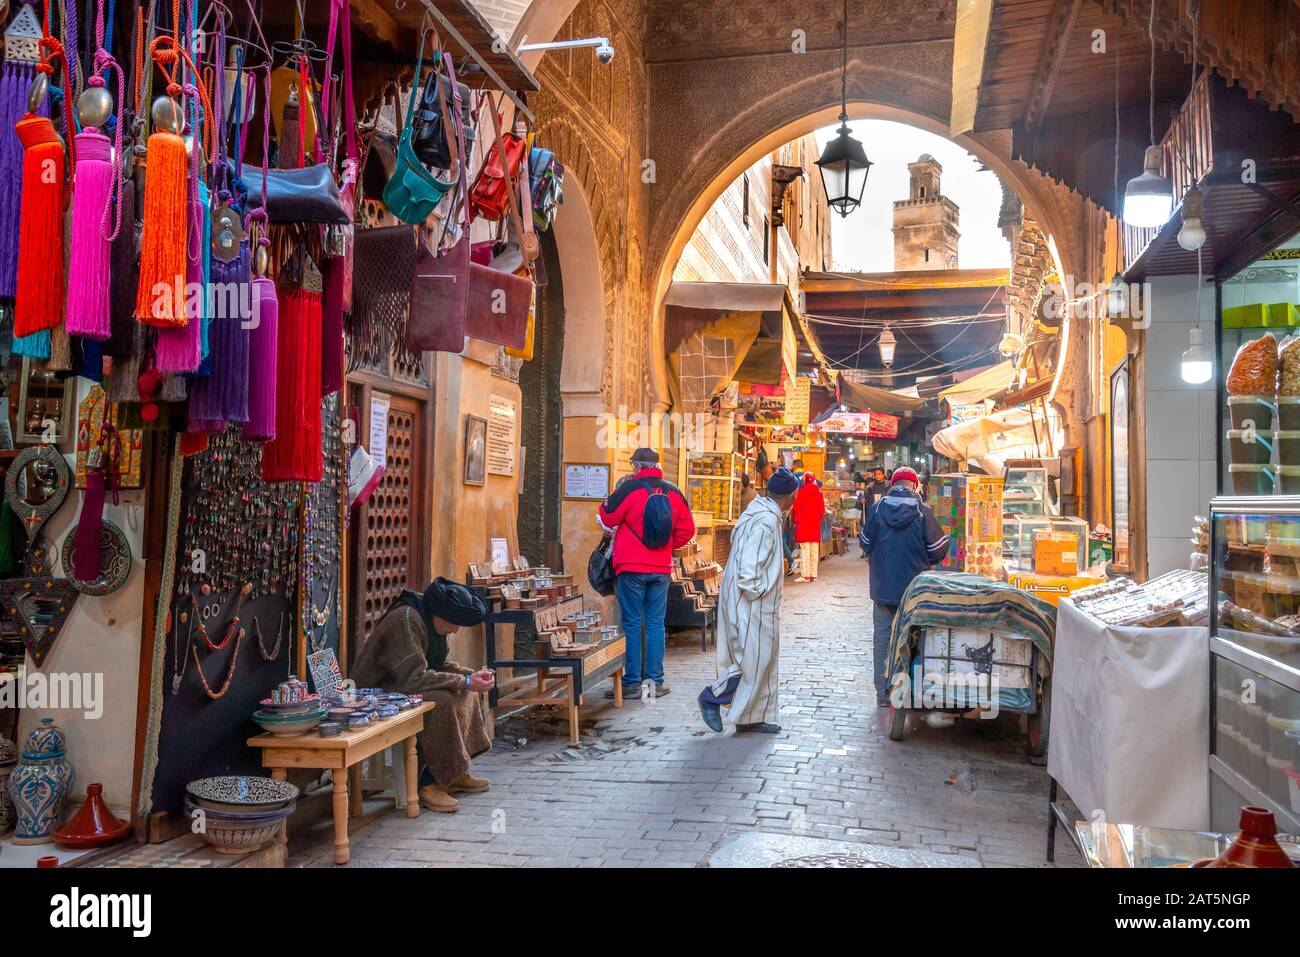 Moroccan market (souk) in the old town (medina) of Fes, Morocco Stock Photo